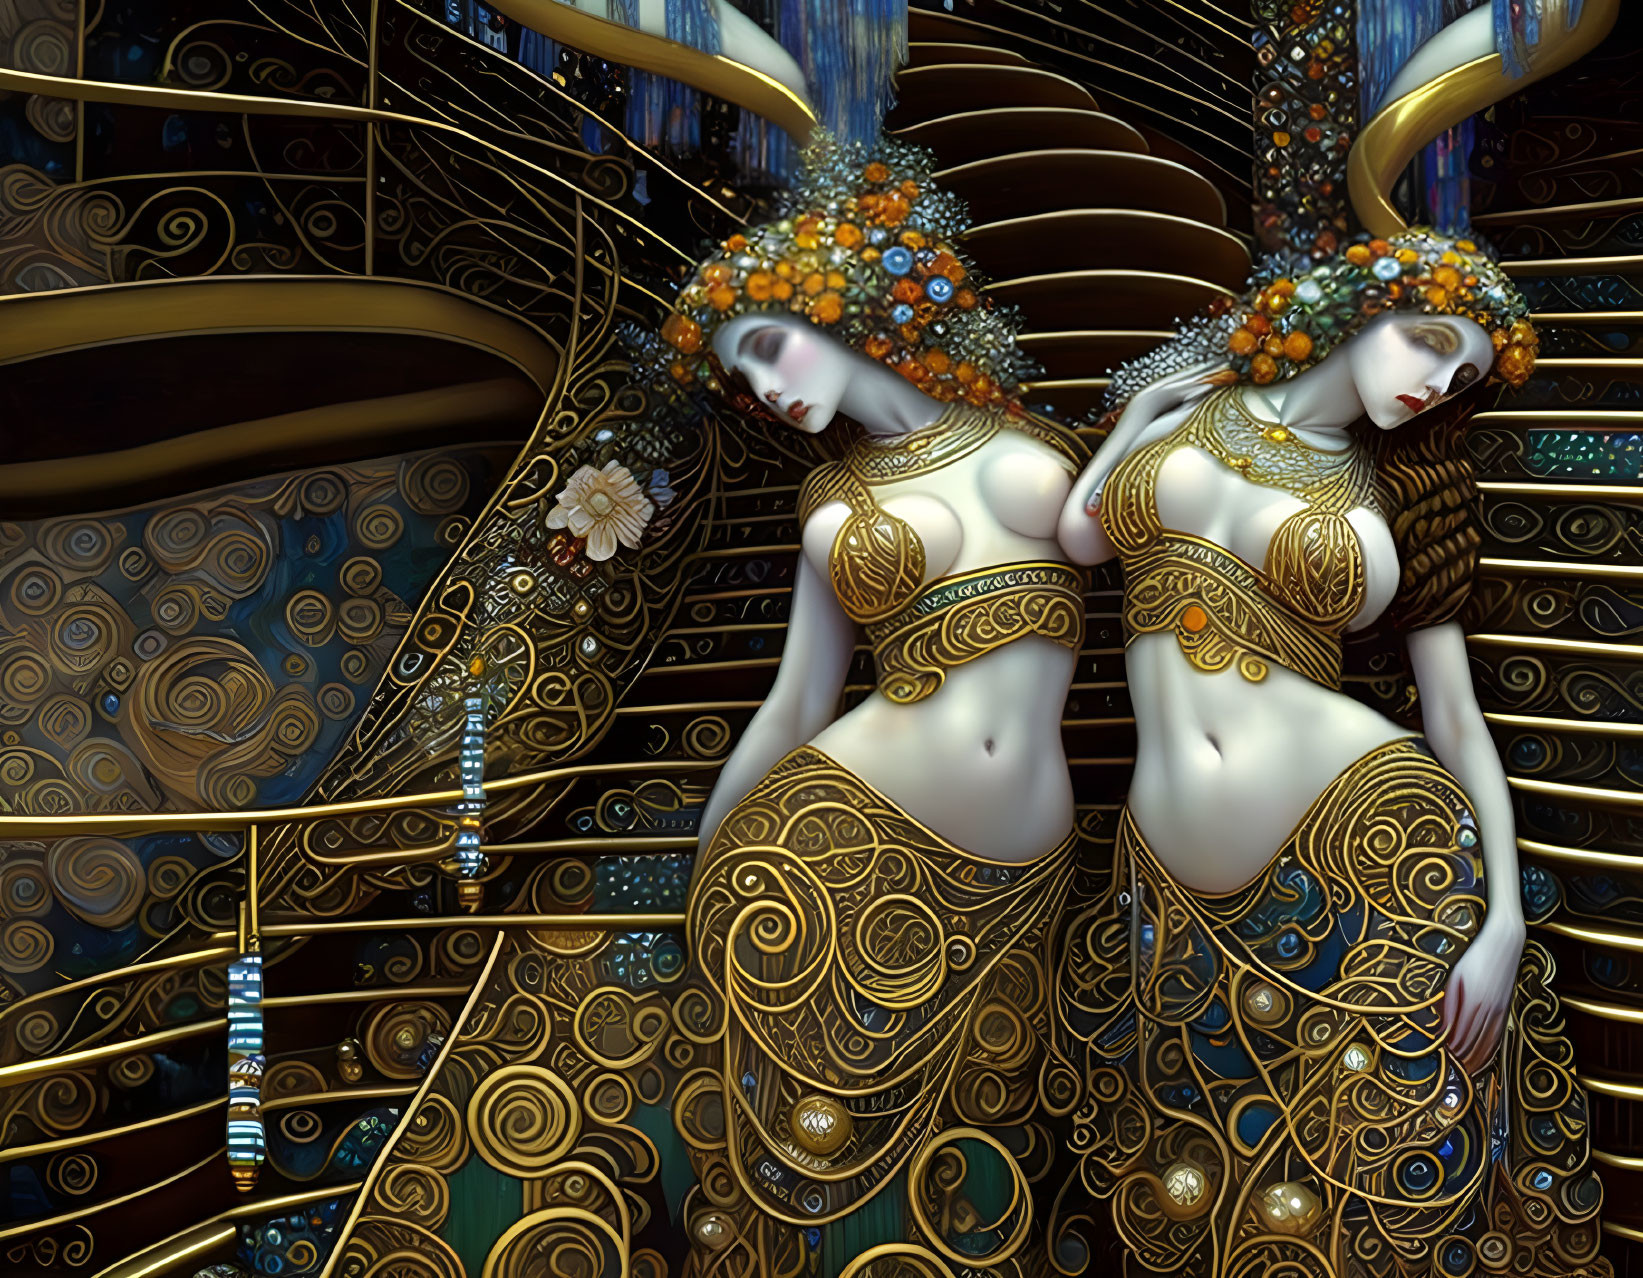 Stylized ornate female figures in golden costumes against intricate background.